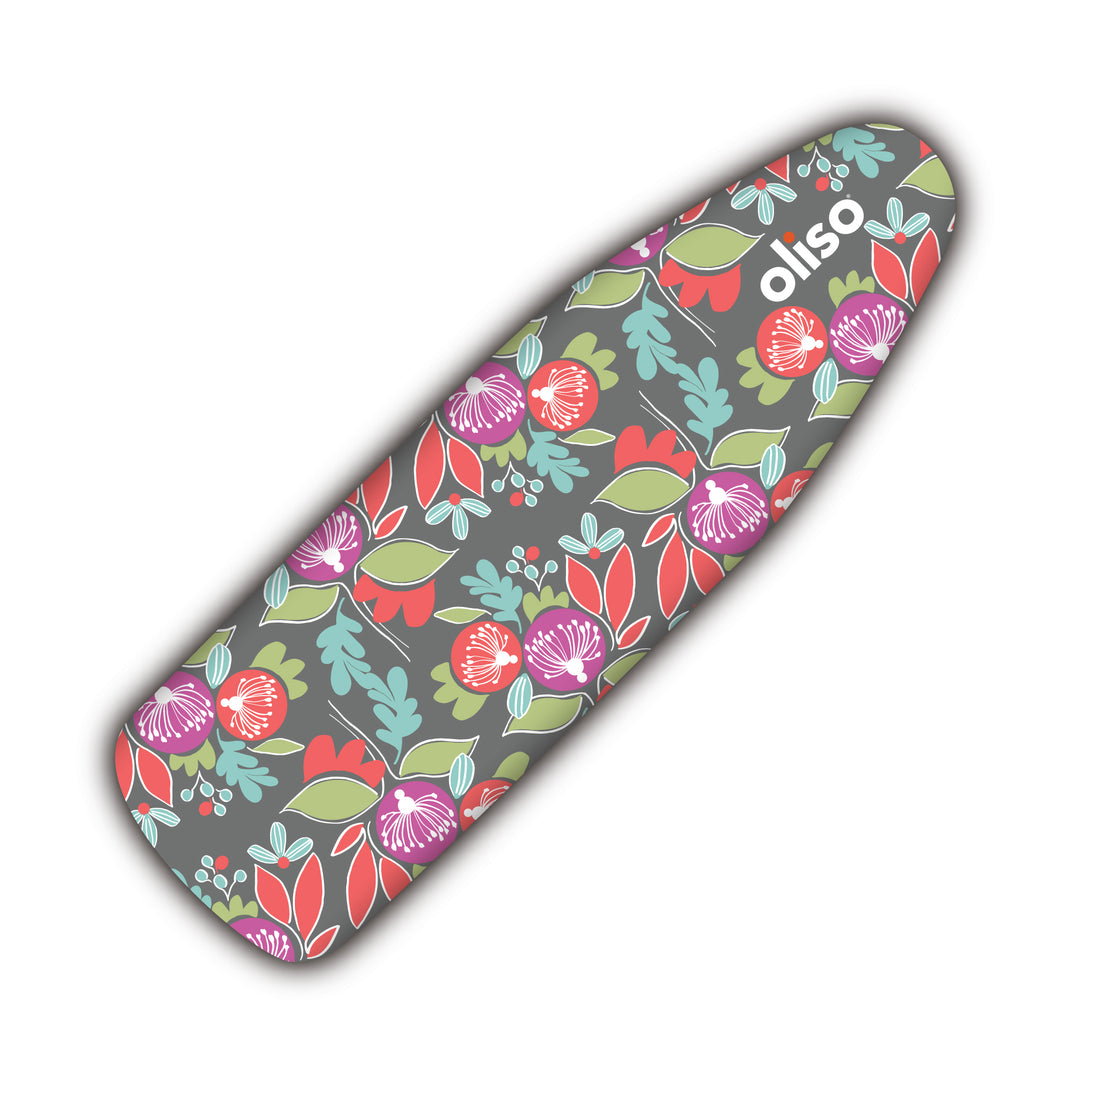 The Oliso ironing board cover&